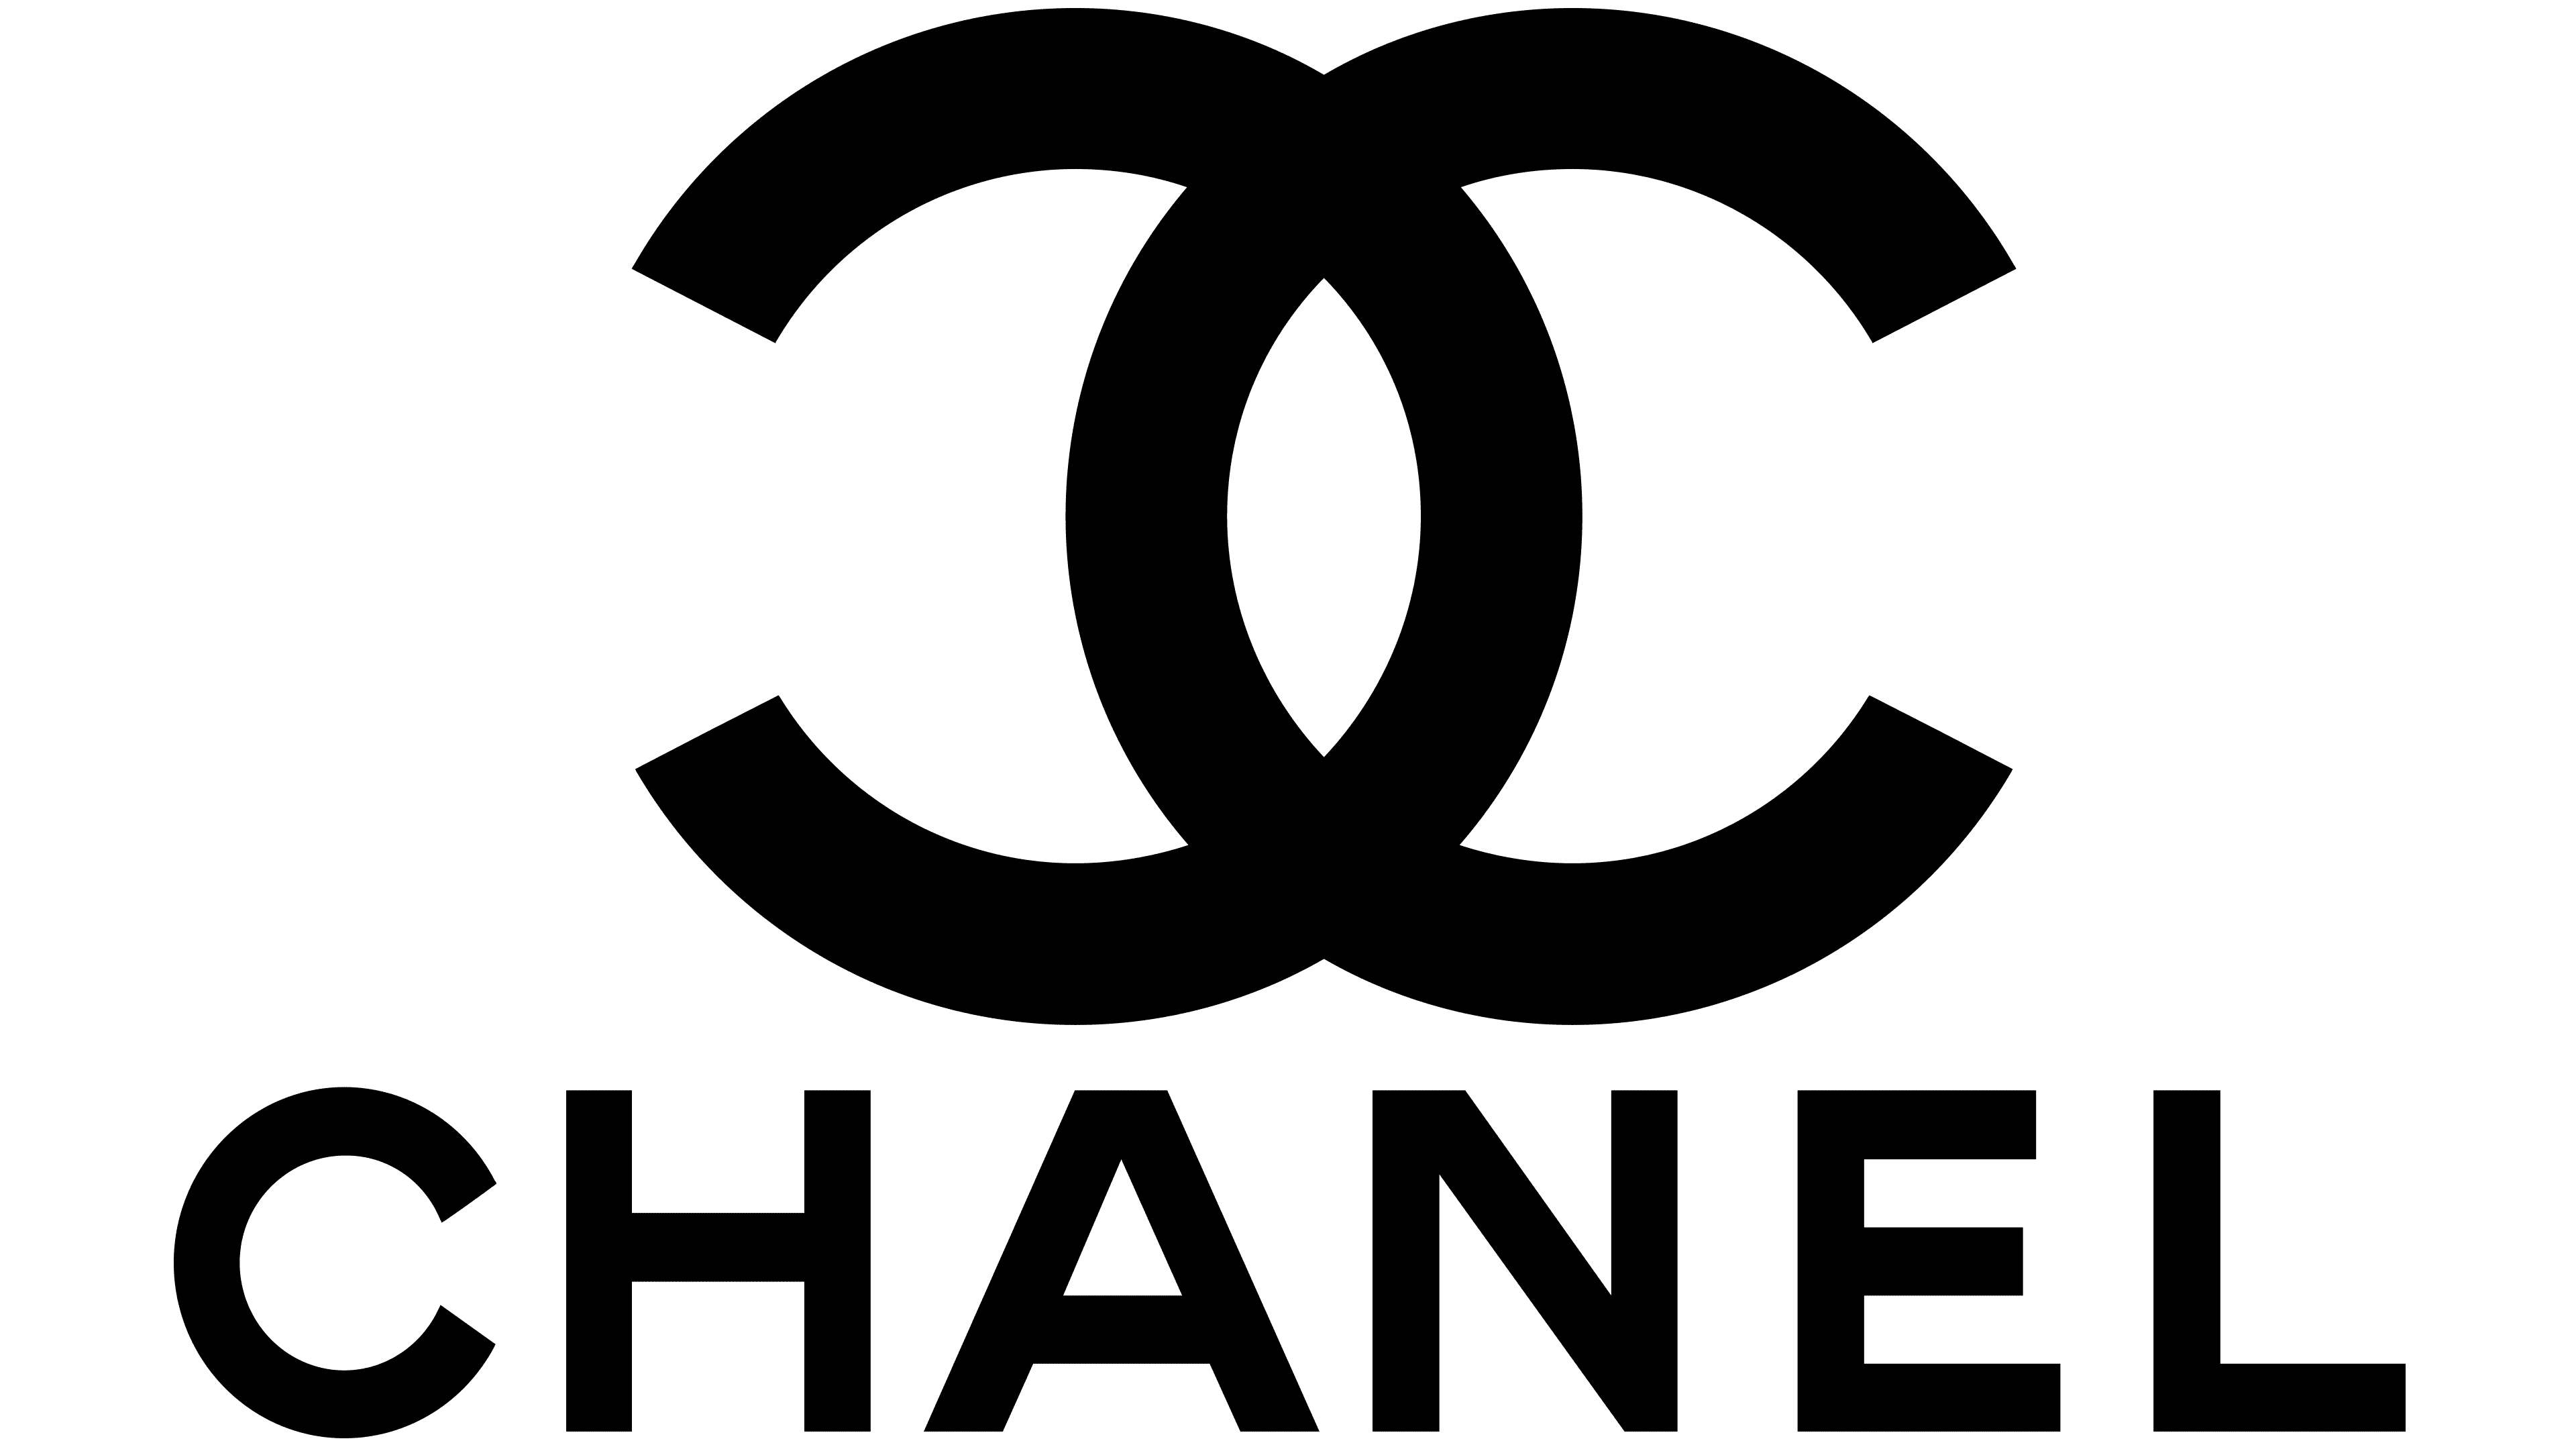 Chanel Logo Design  History Meaning and Evolution  Turbologo